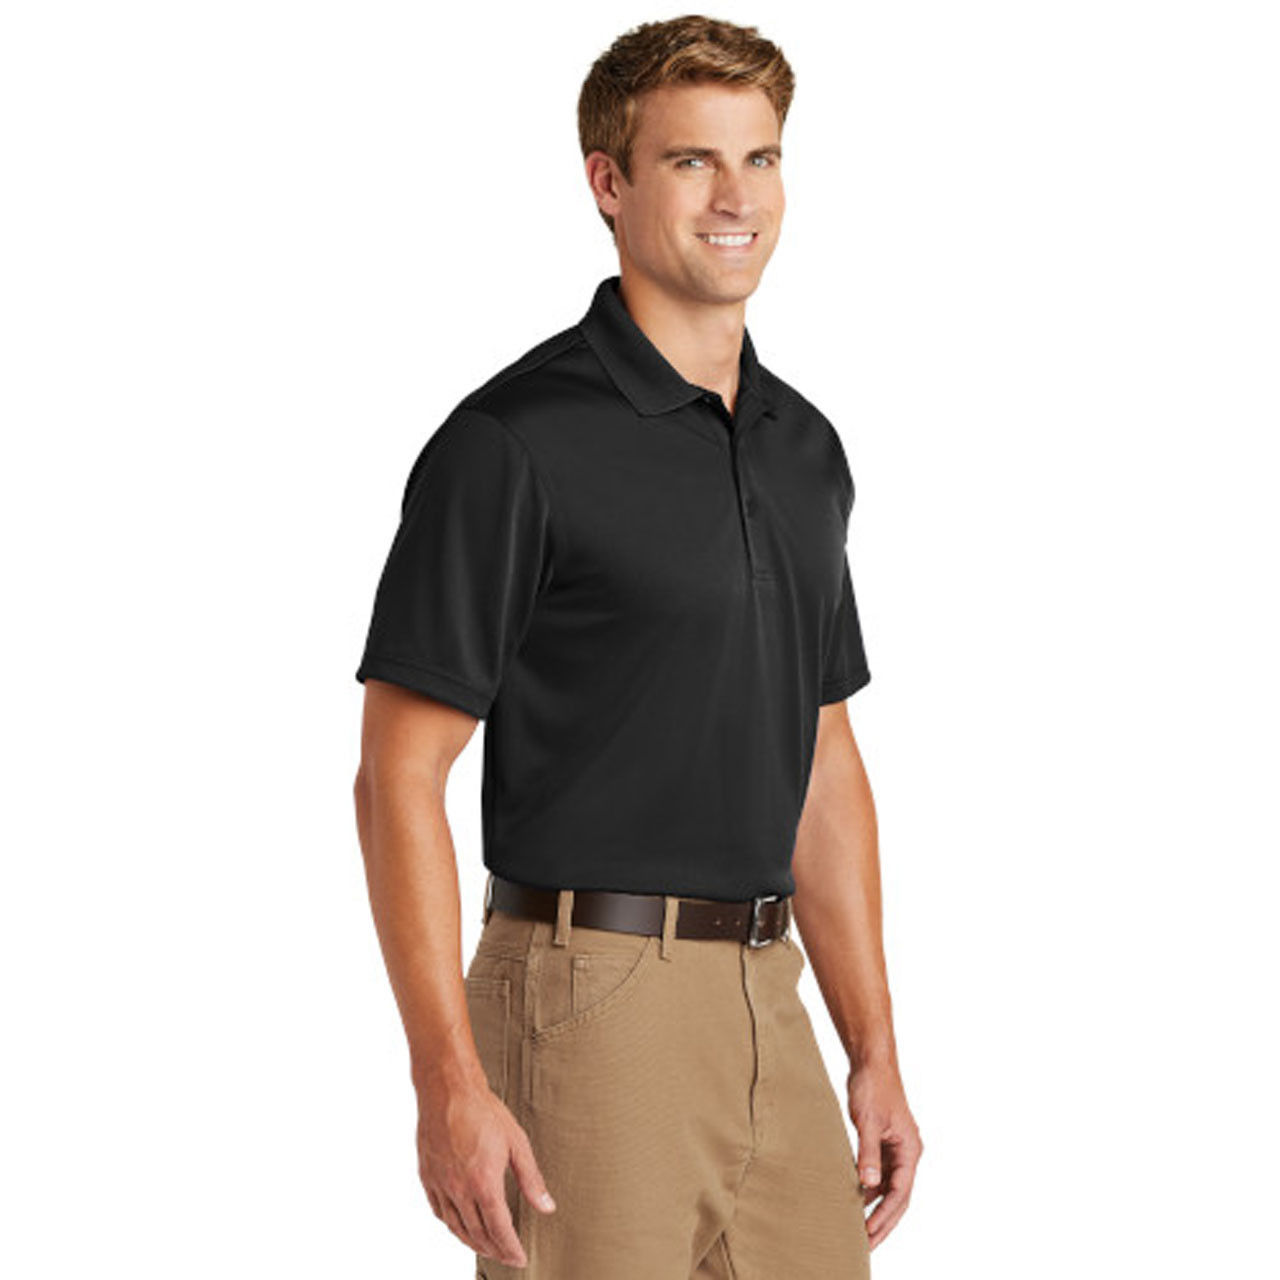 What kind of collar does the men's black polo shirt have?